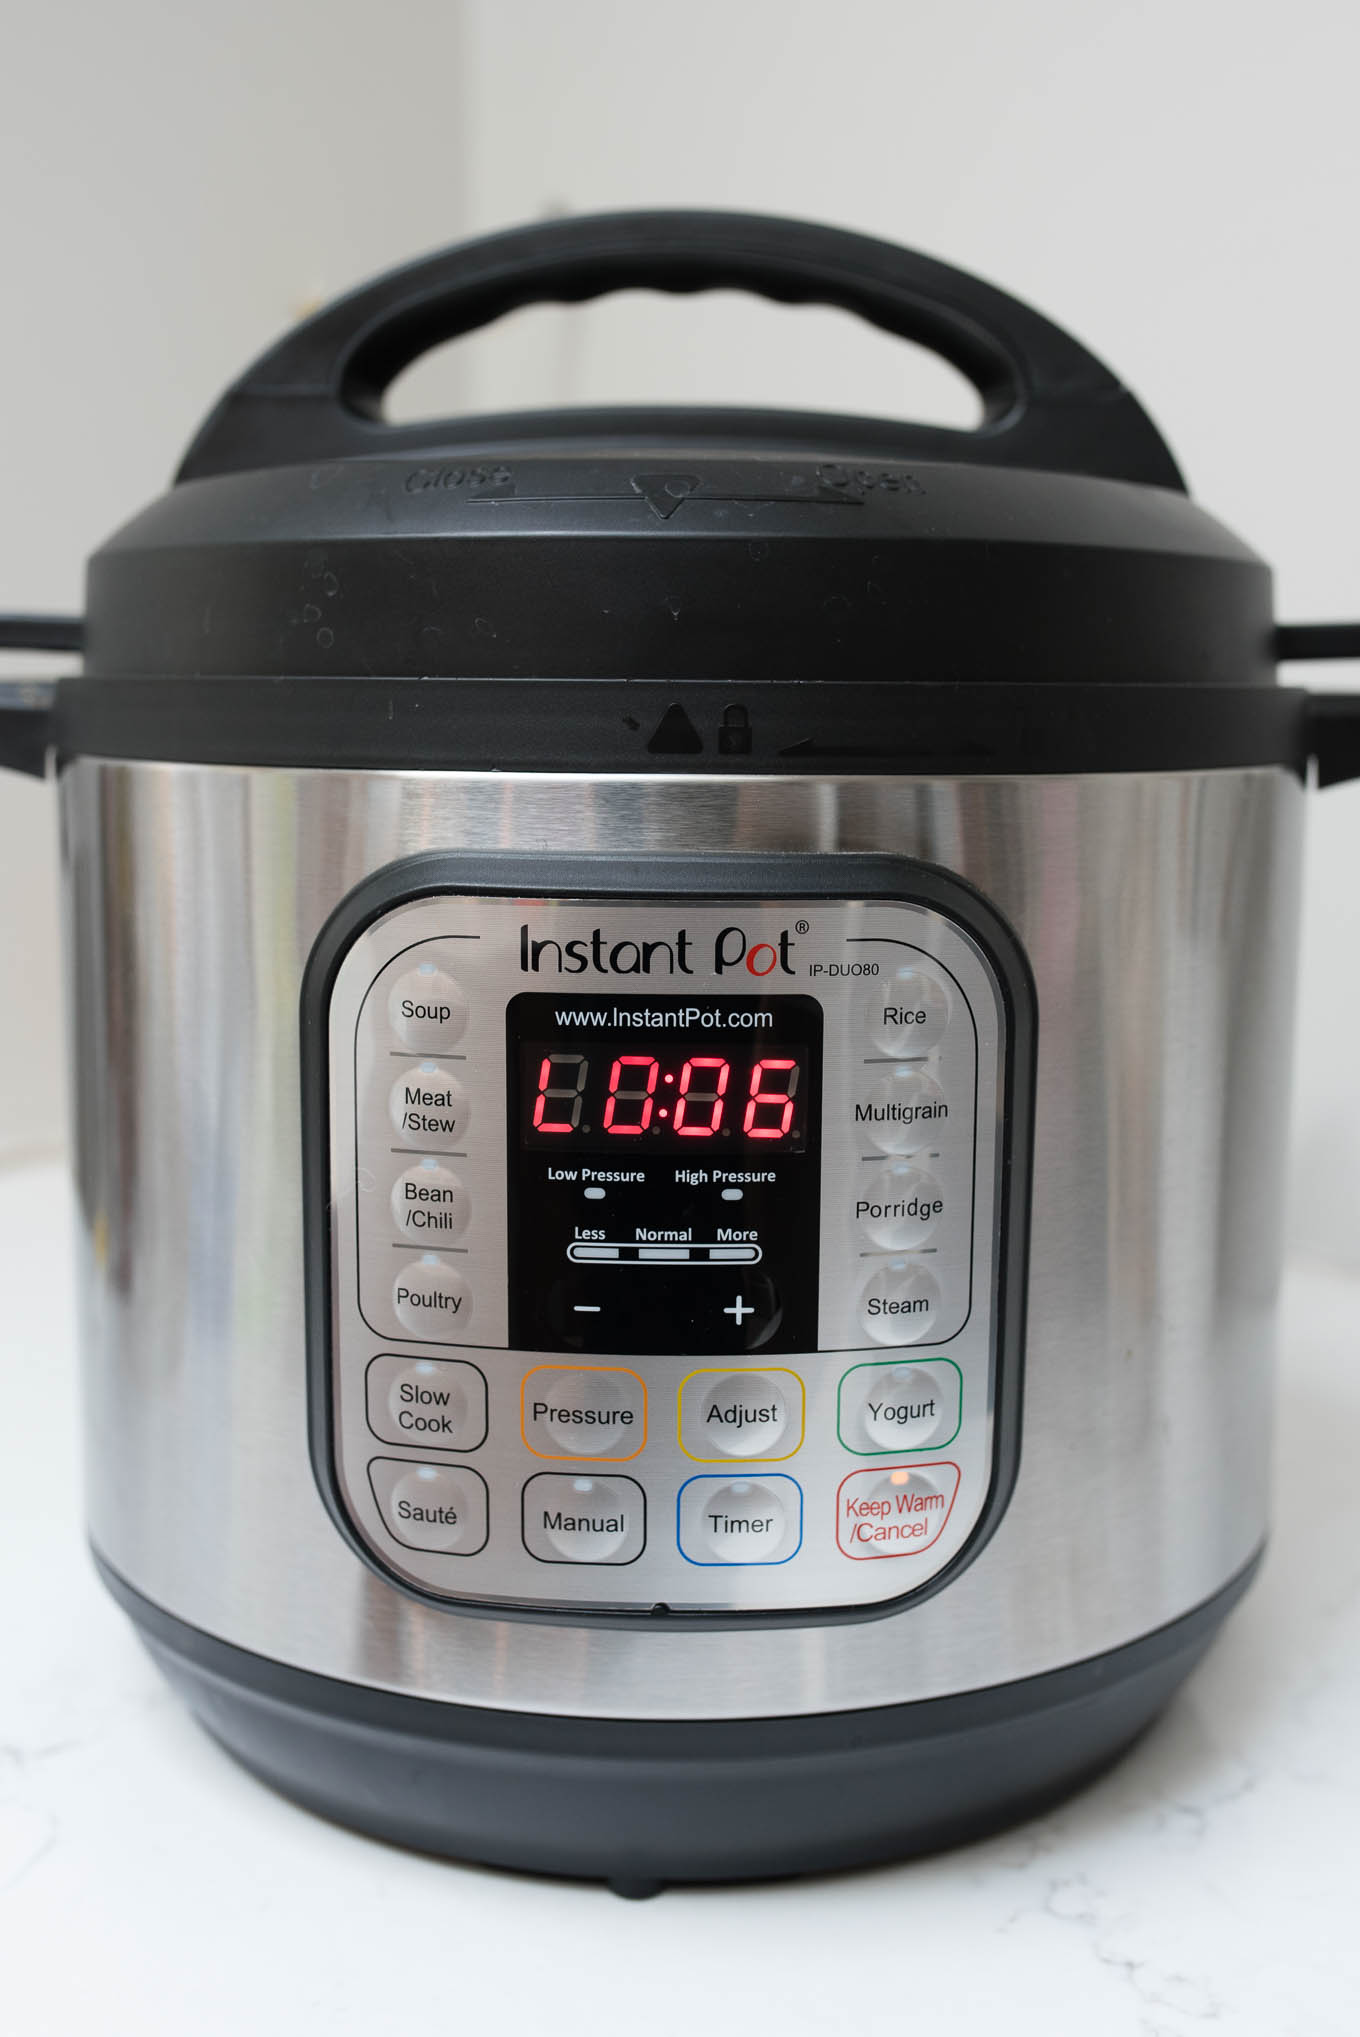 Pressure reducing in the Instant Pot